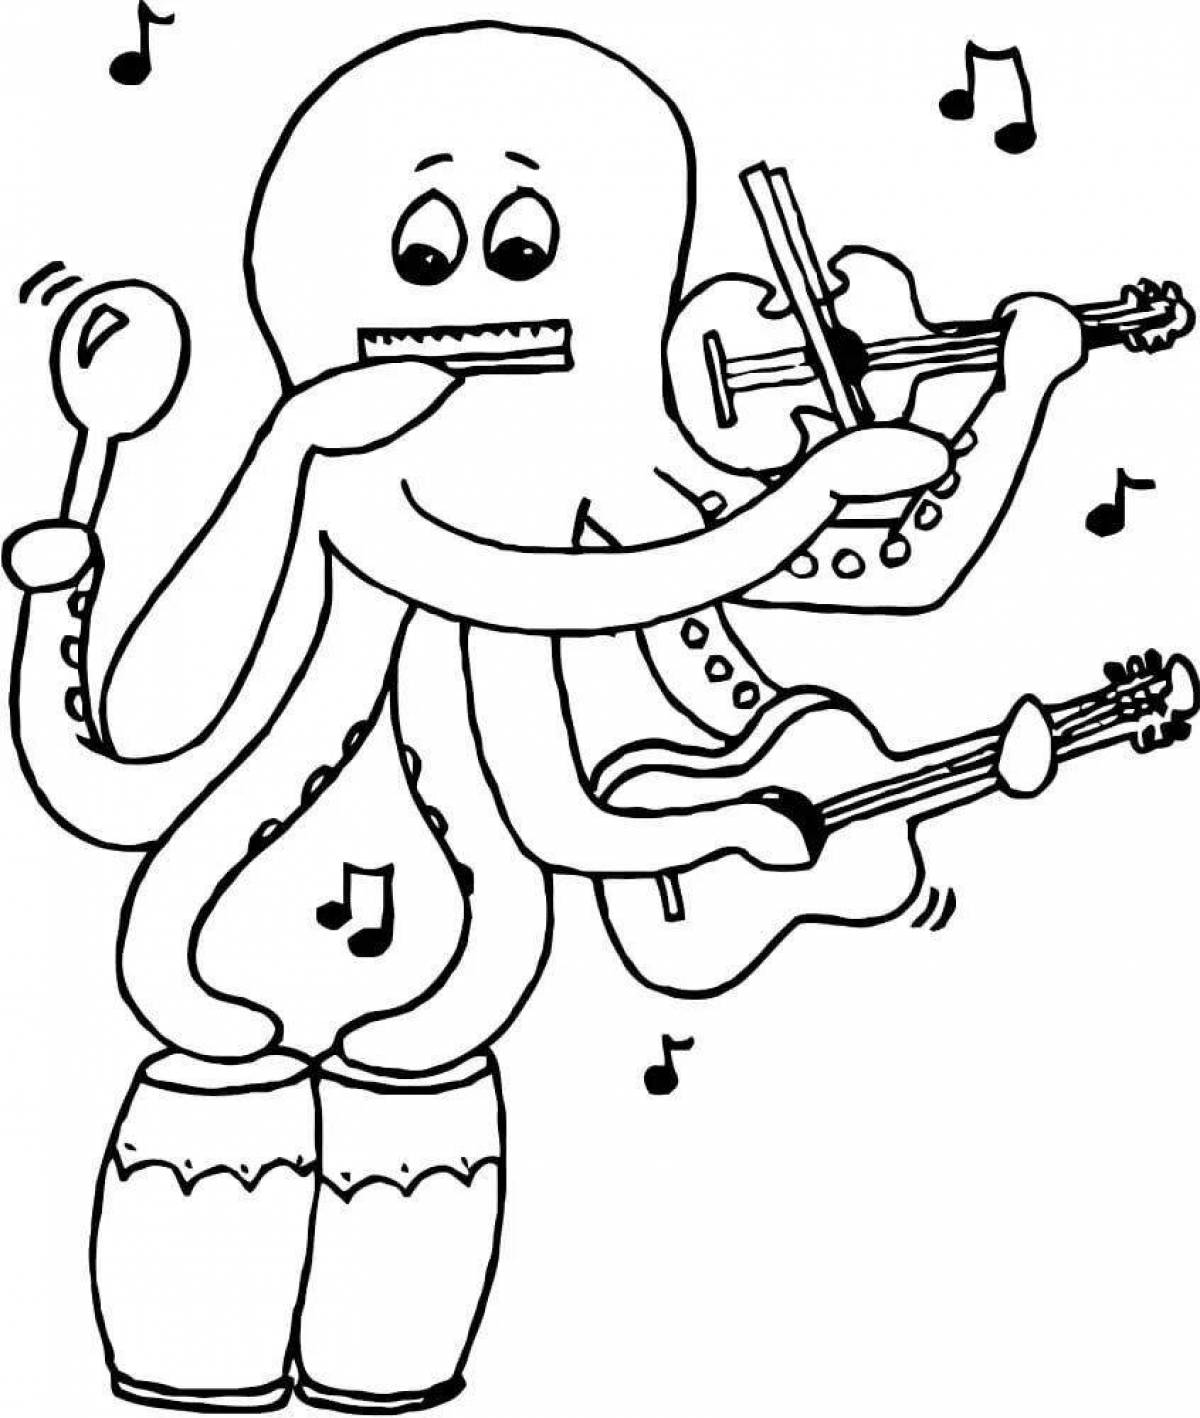 Shining musical note coloring page